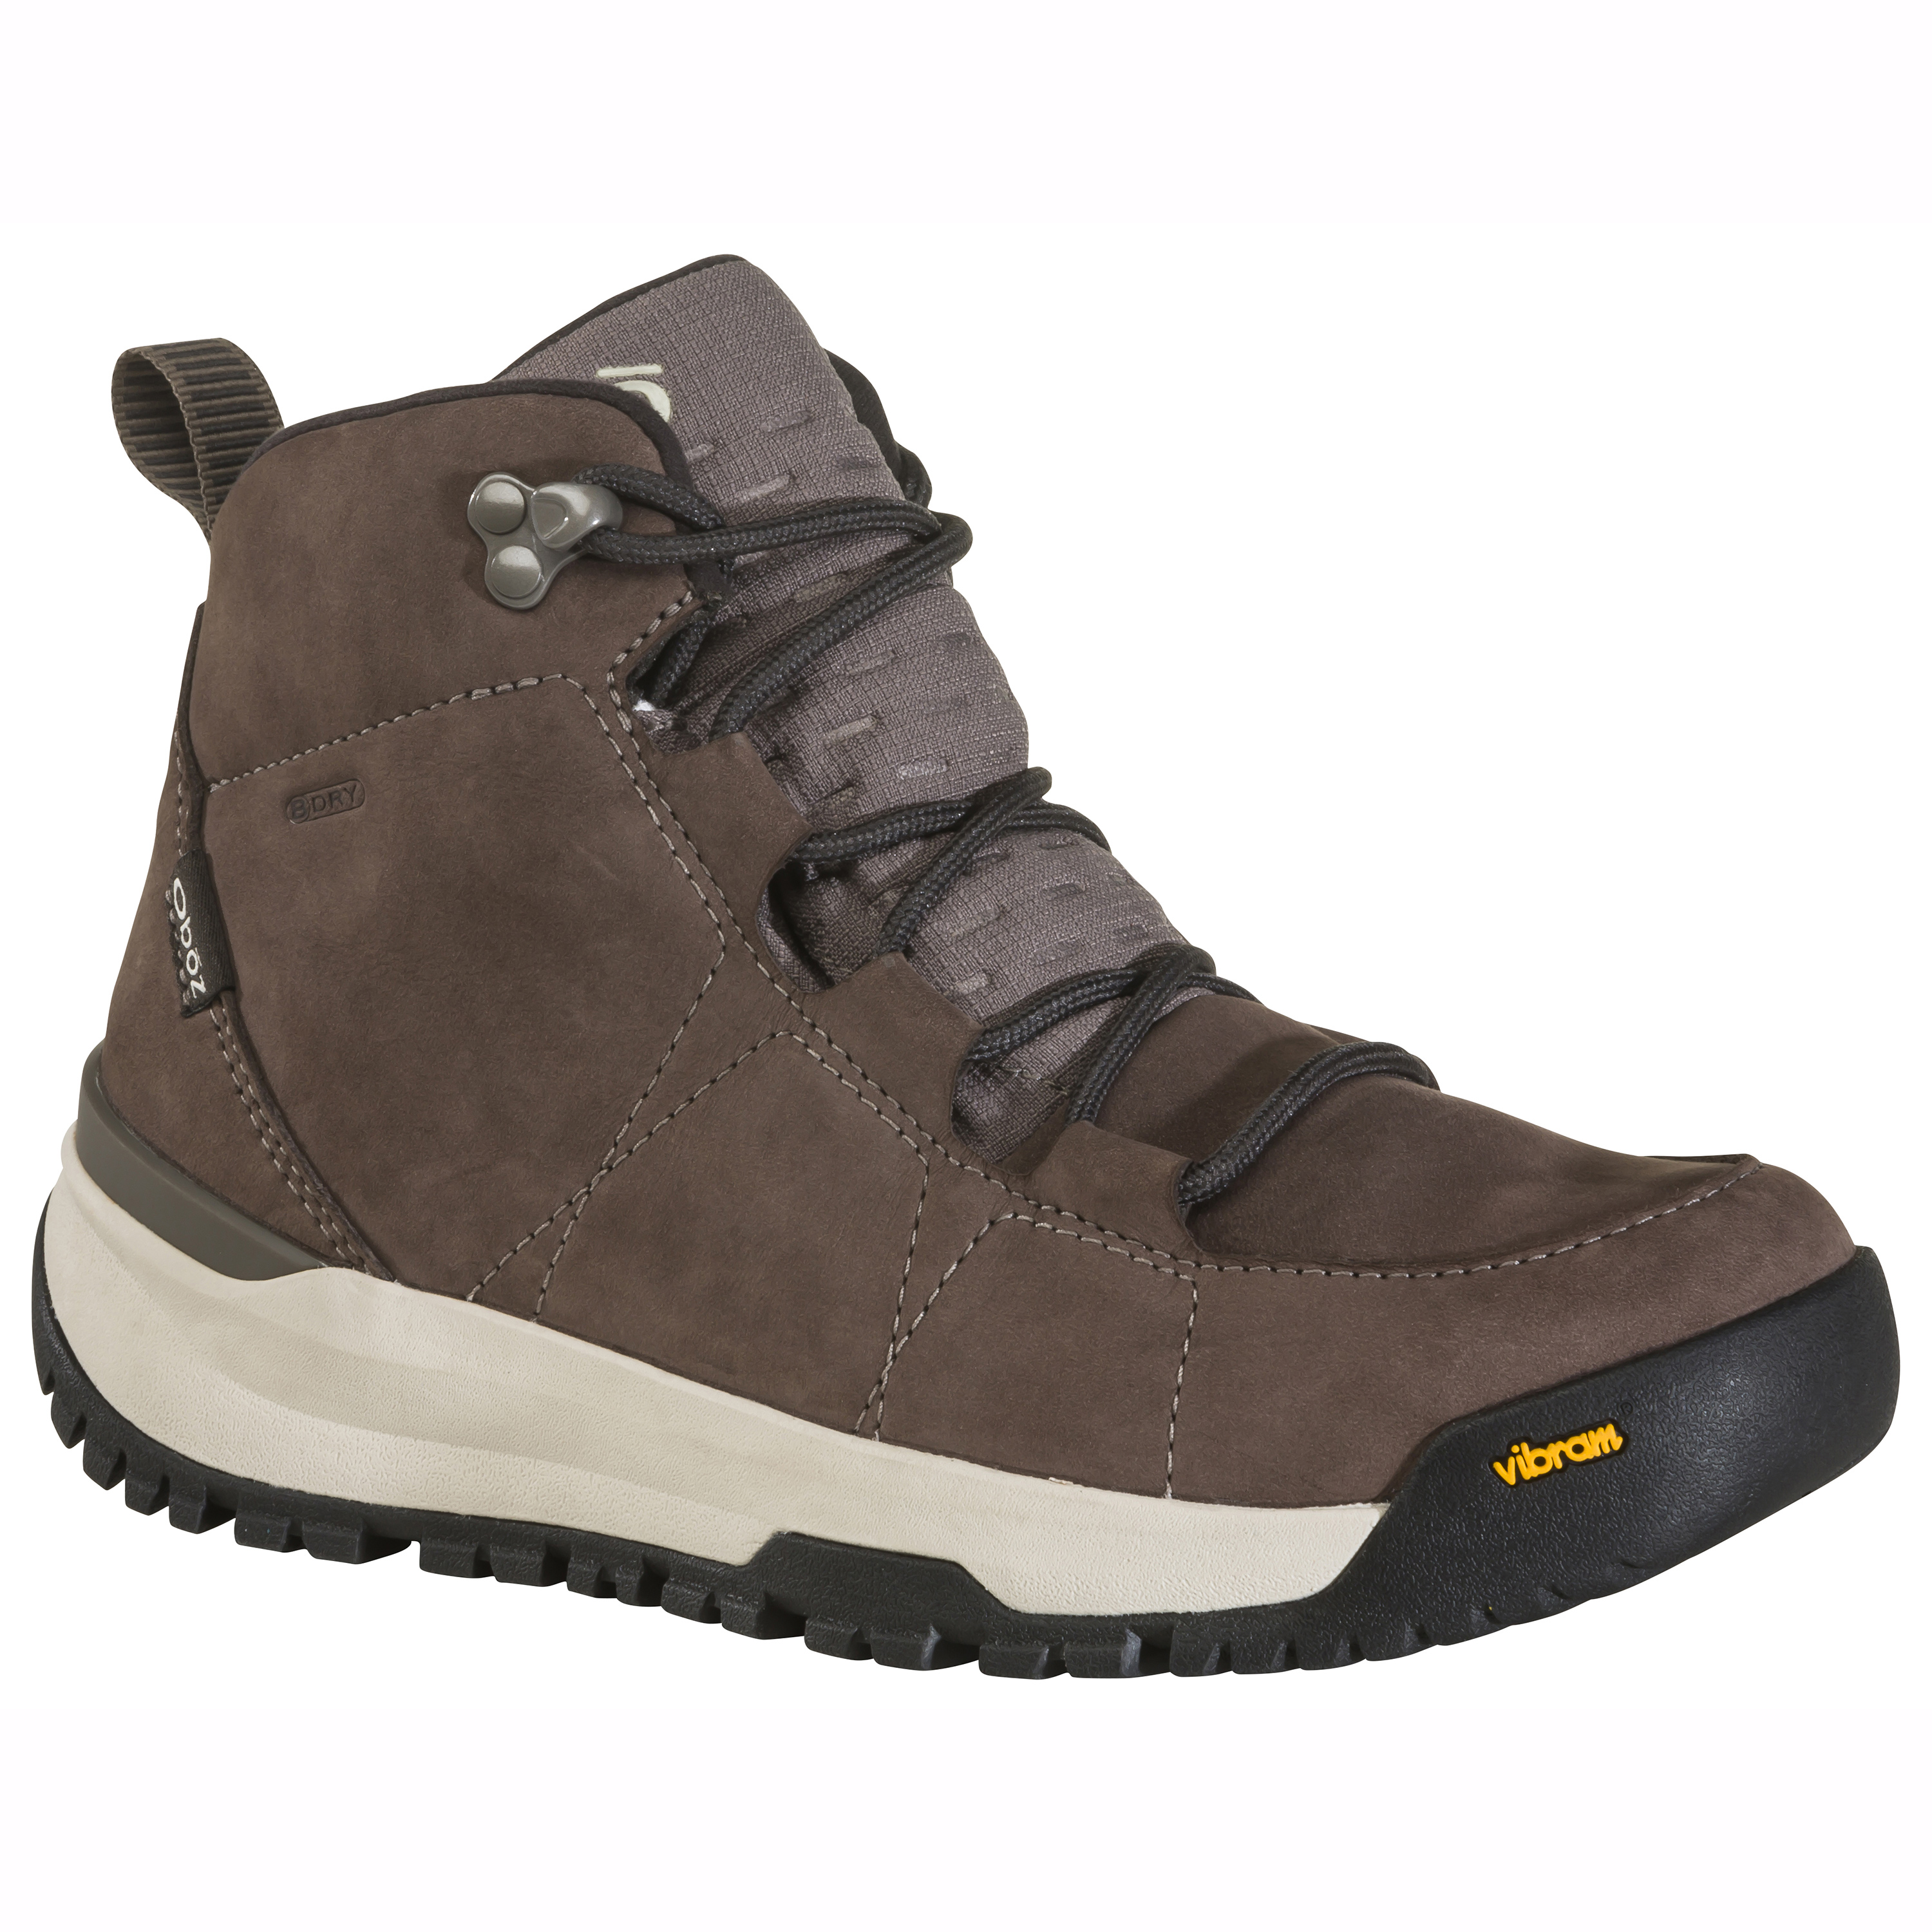 Women's Oboz Sphinx Mid Insulated B Dry